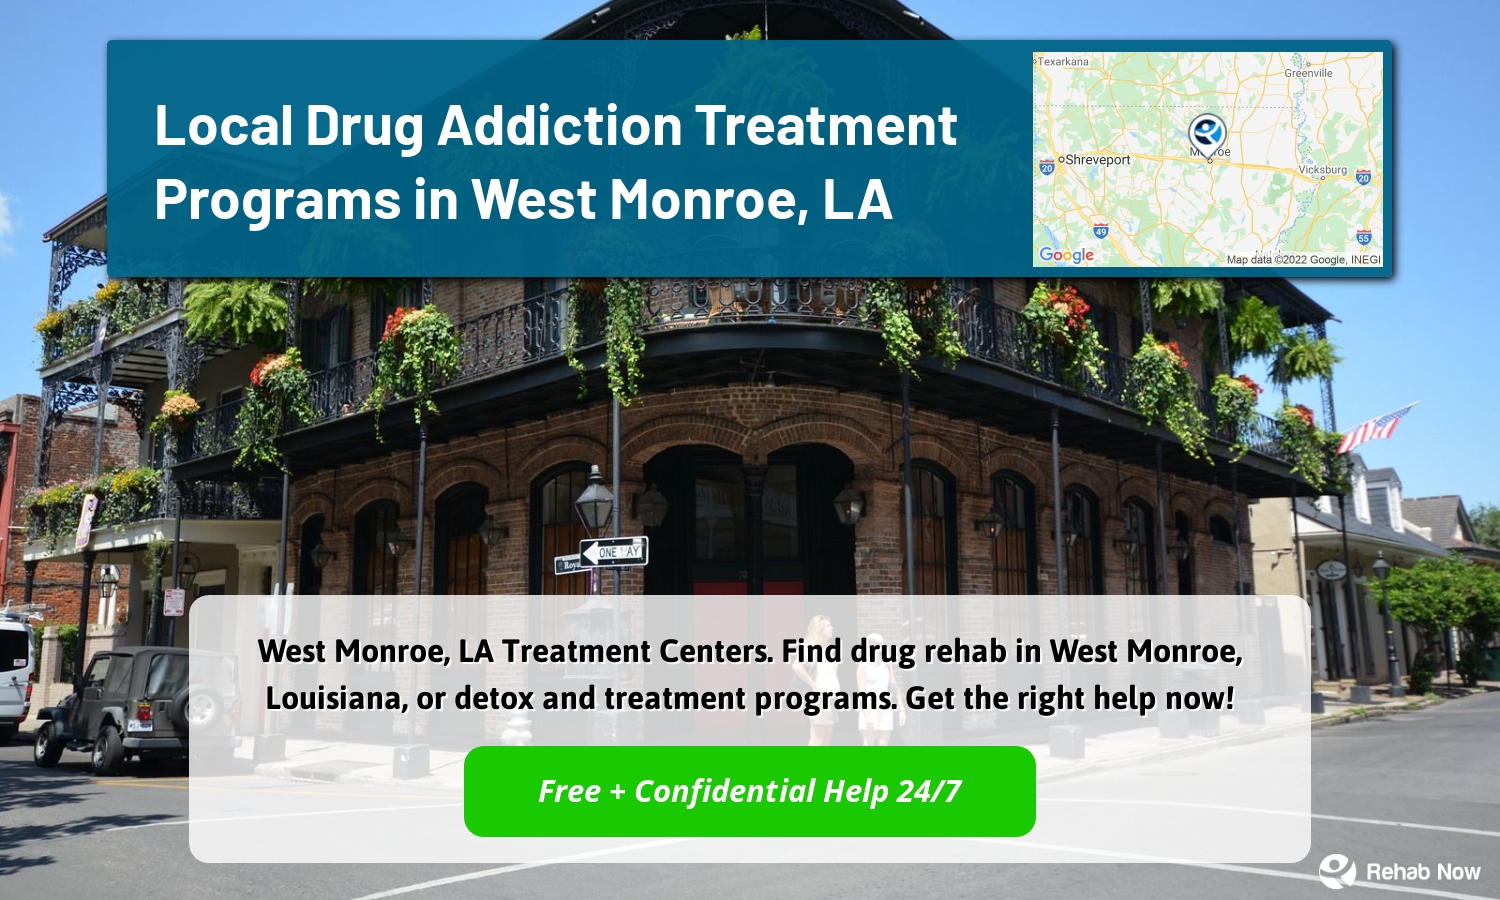 West Monroe, LA Treatment Centers. Find drug rehab in West Monroe, Louisiana, or detox and treatment programs. Get the right help now!